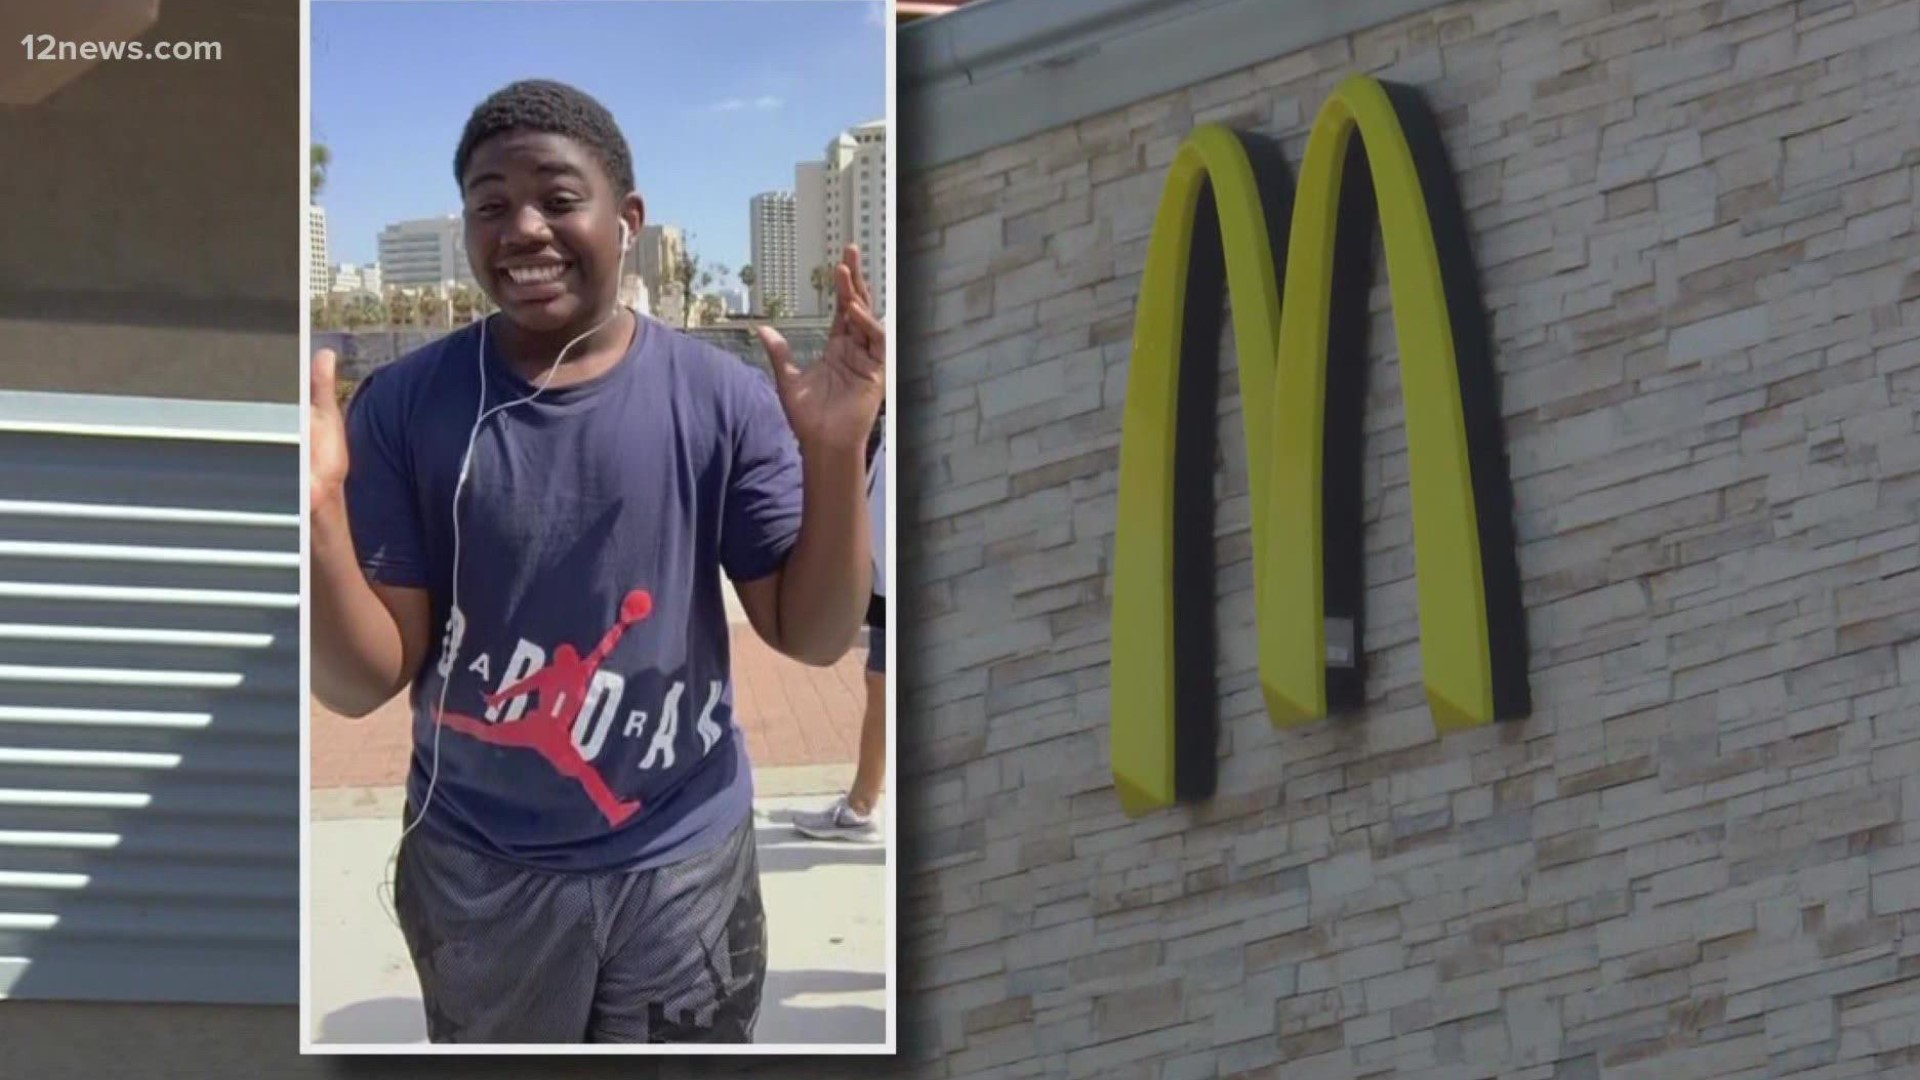 16-year-old Prince Nedd was working at a Phoenix McDonald's on Wednesday when he was shot and killed. Police are still looking for the suspect who shot him.